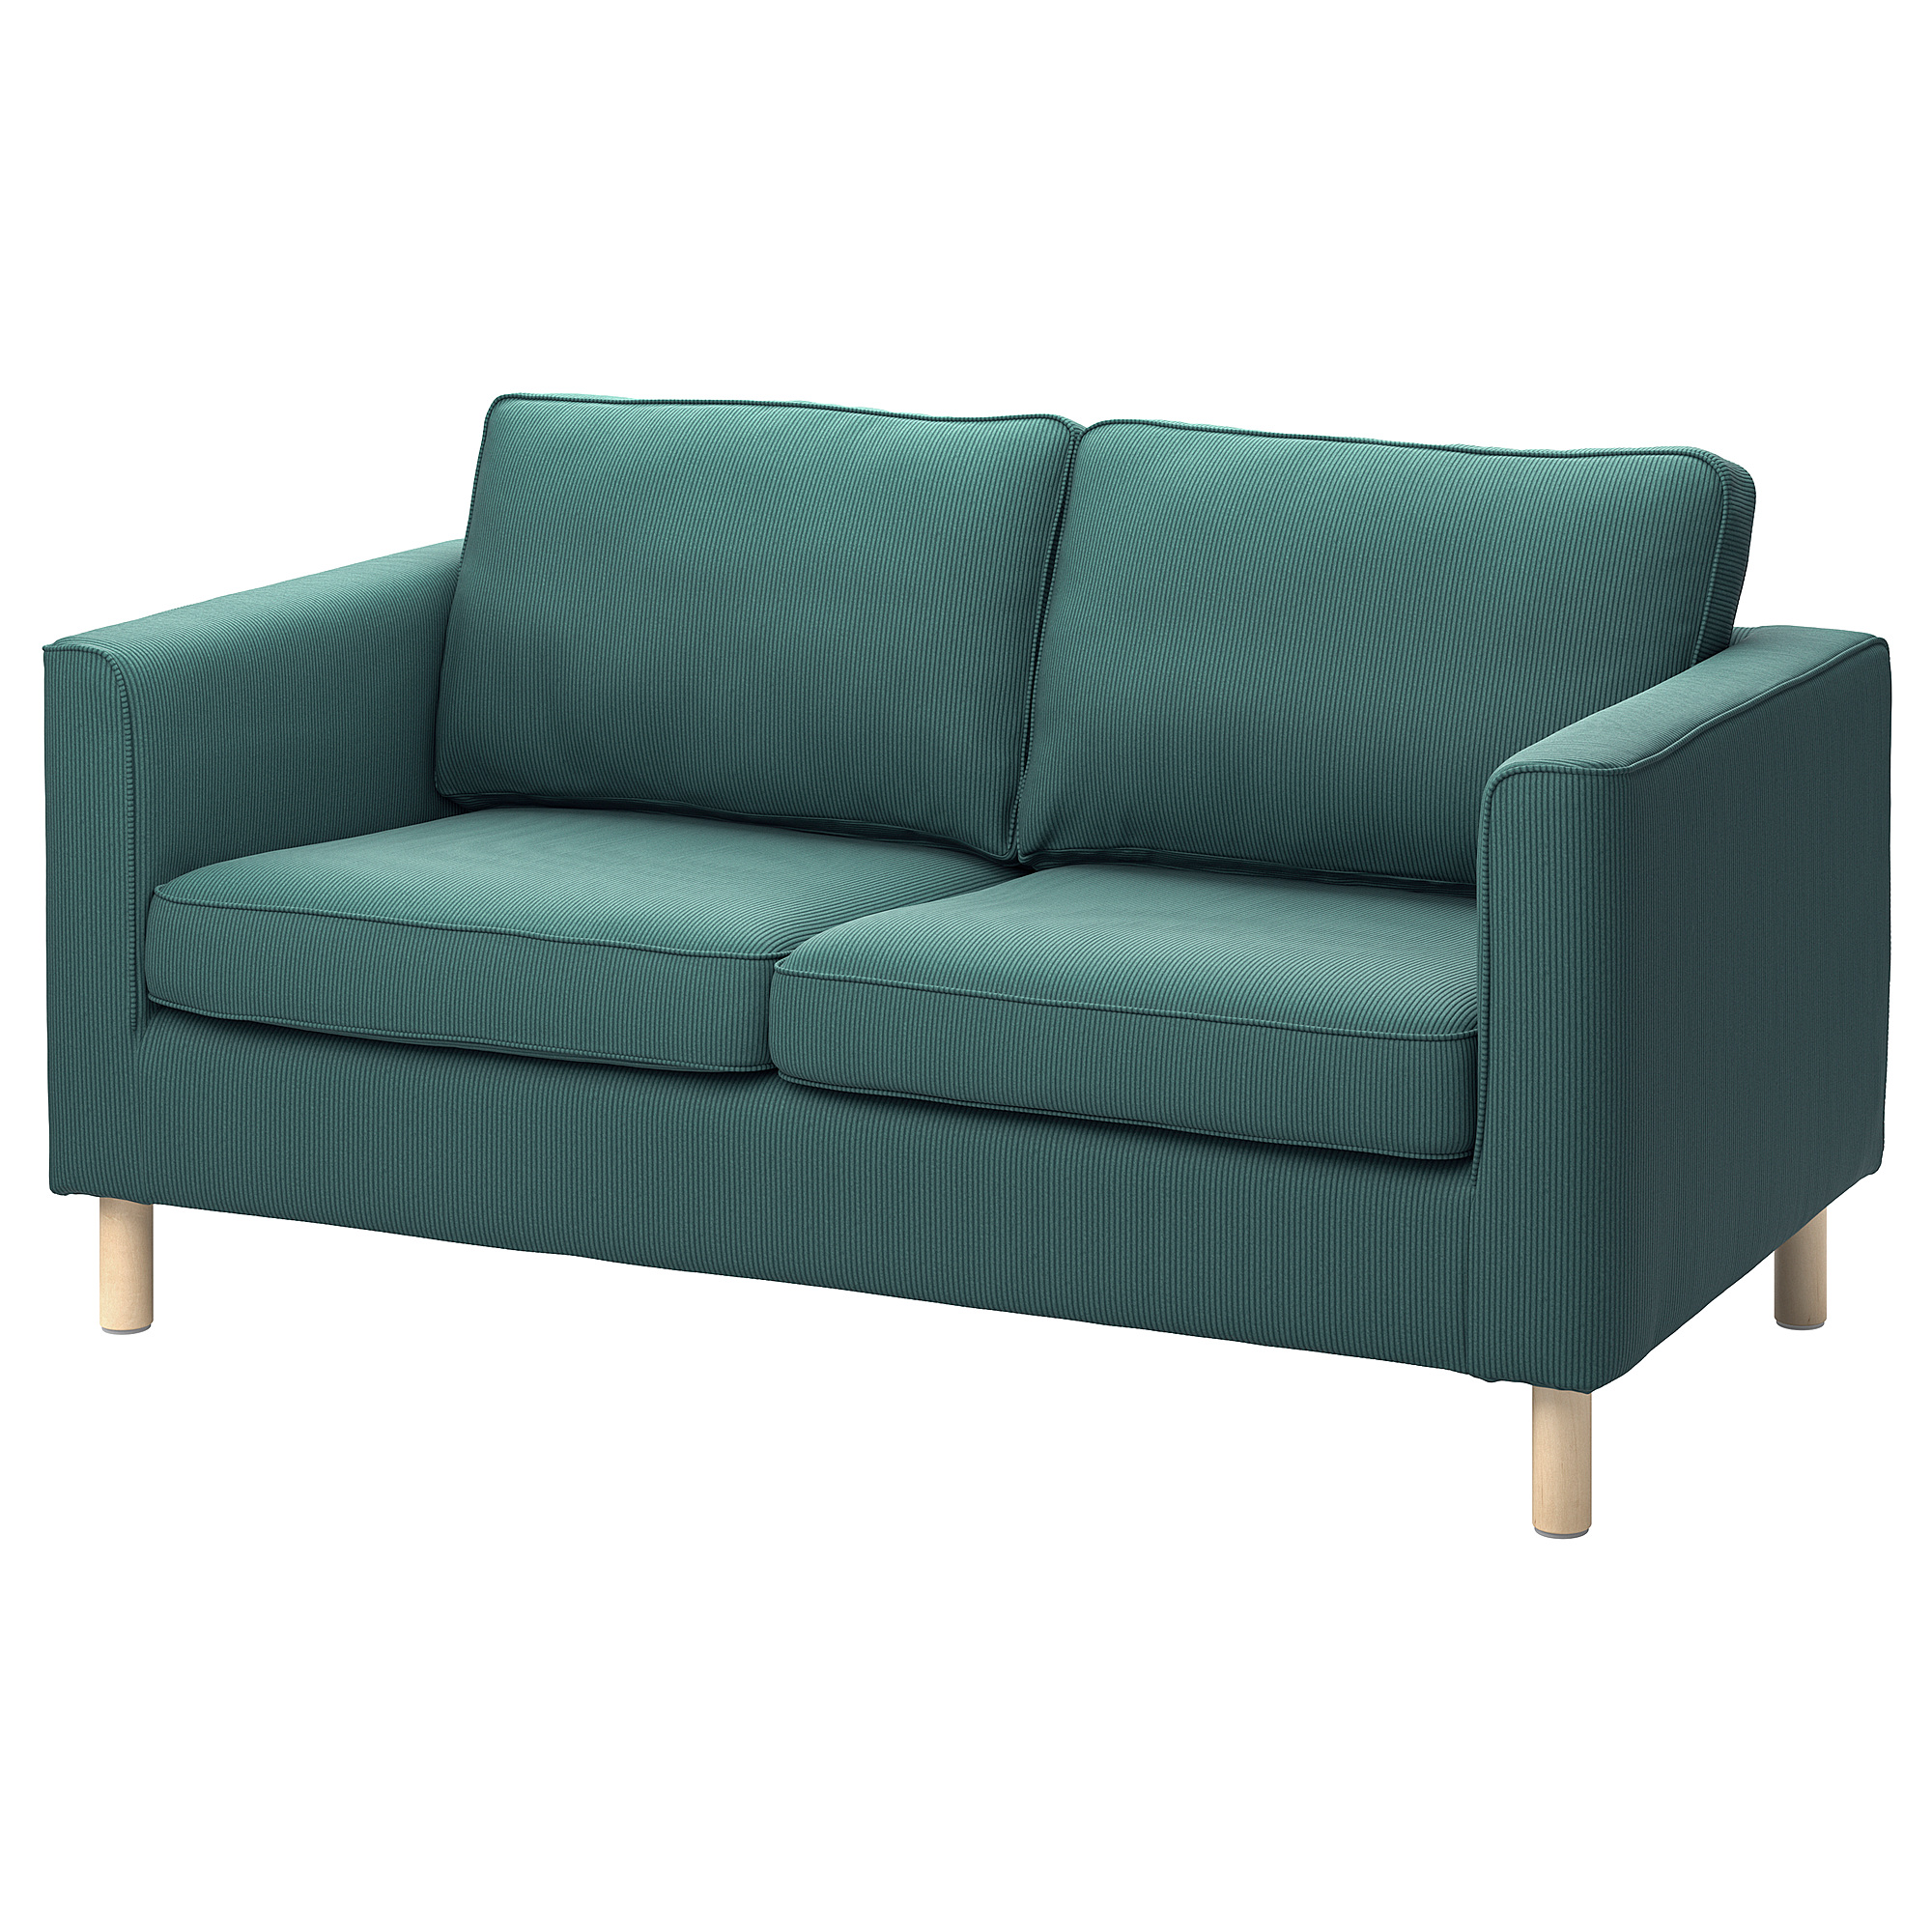 PÄRUP cover for 2-seat sofa